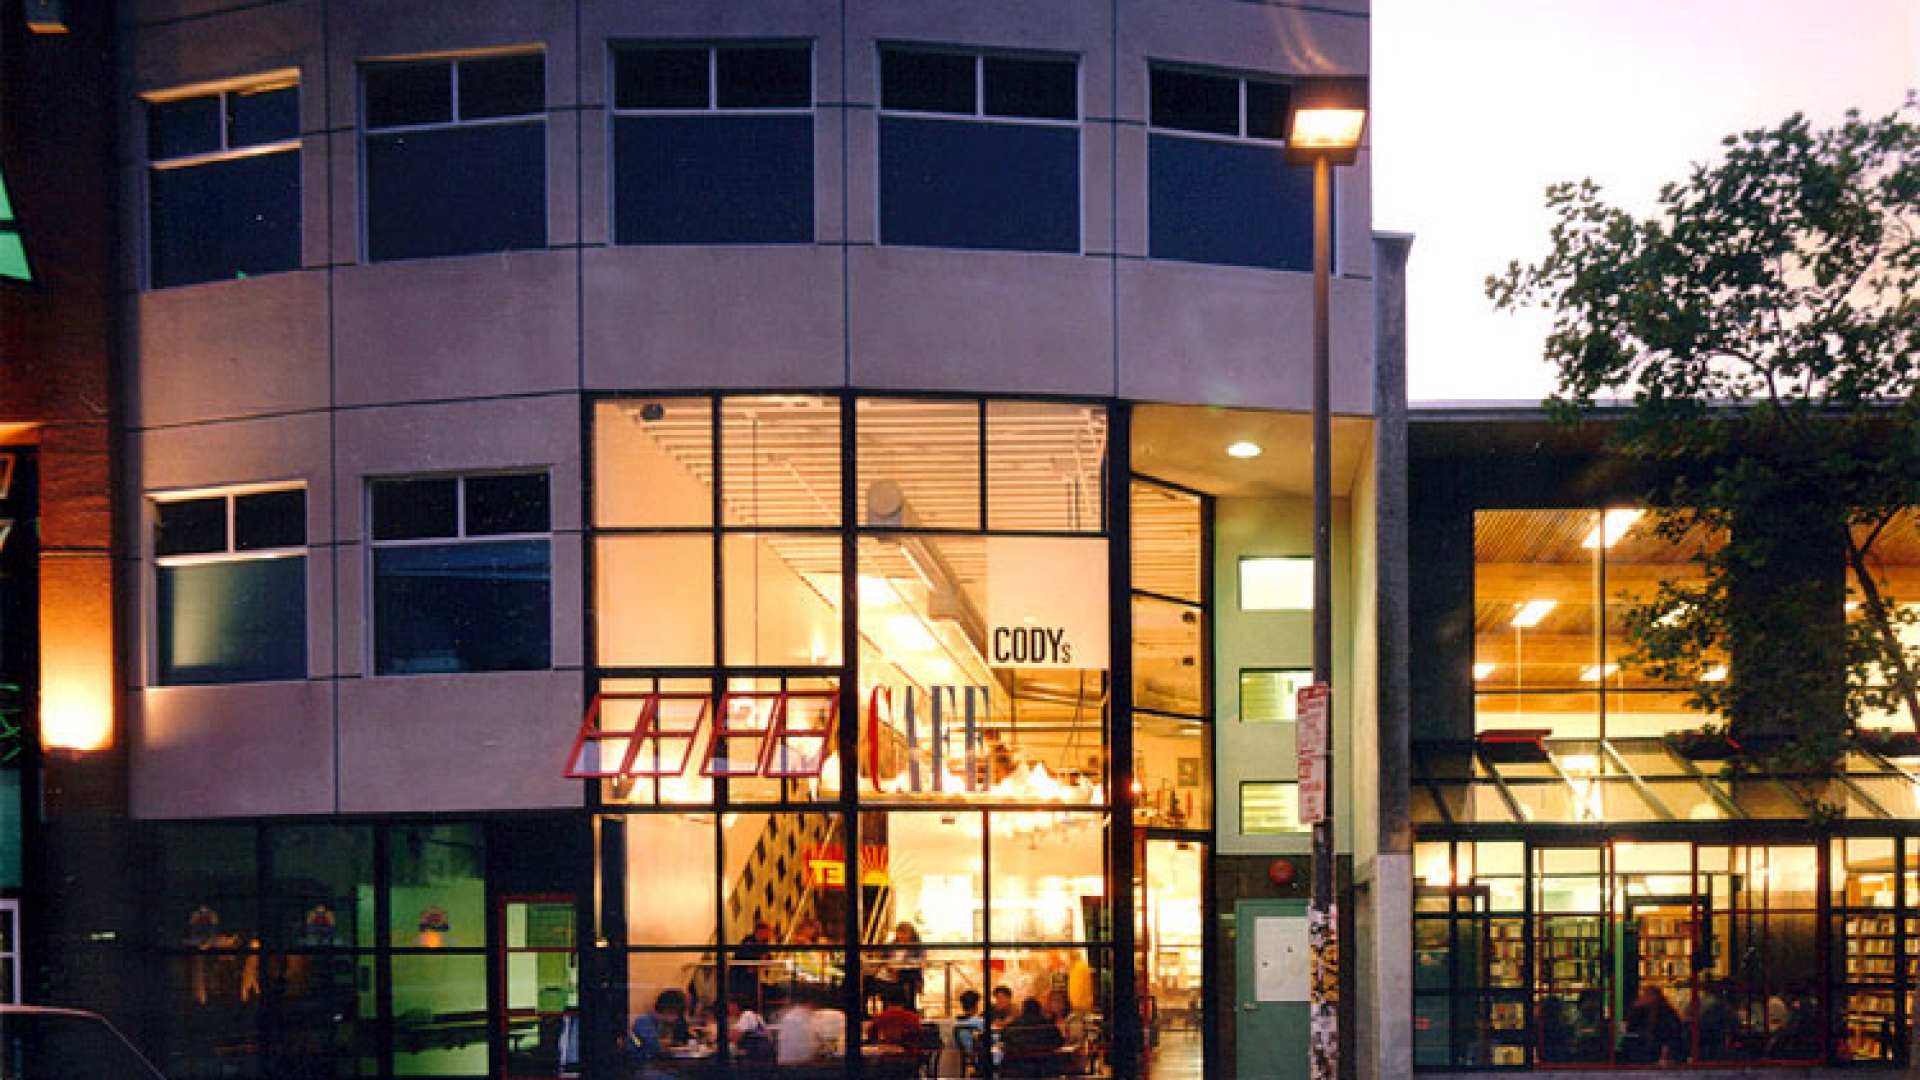 Exterior street view of  Fred Cody Building & Cody's Cafe at dusk in Berkeley, California.